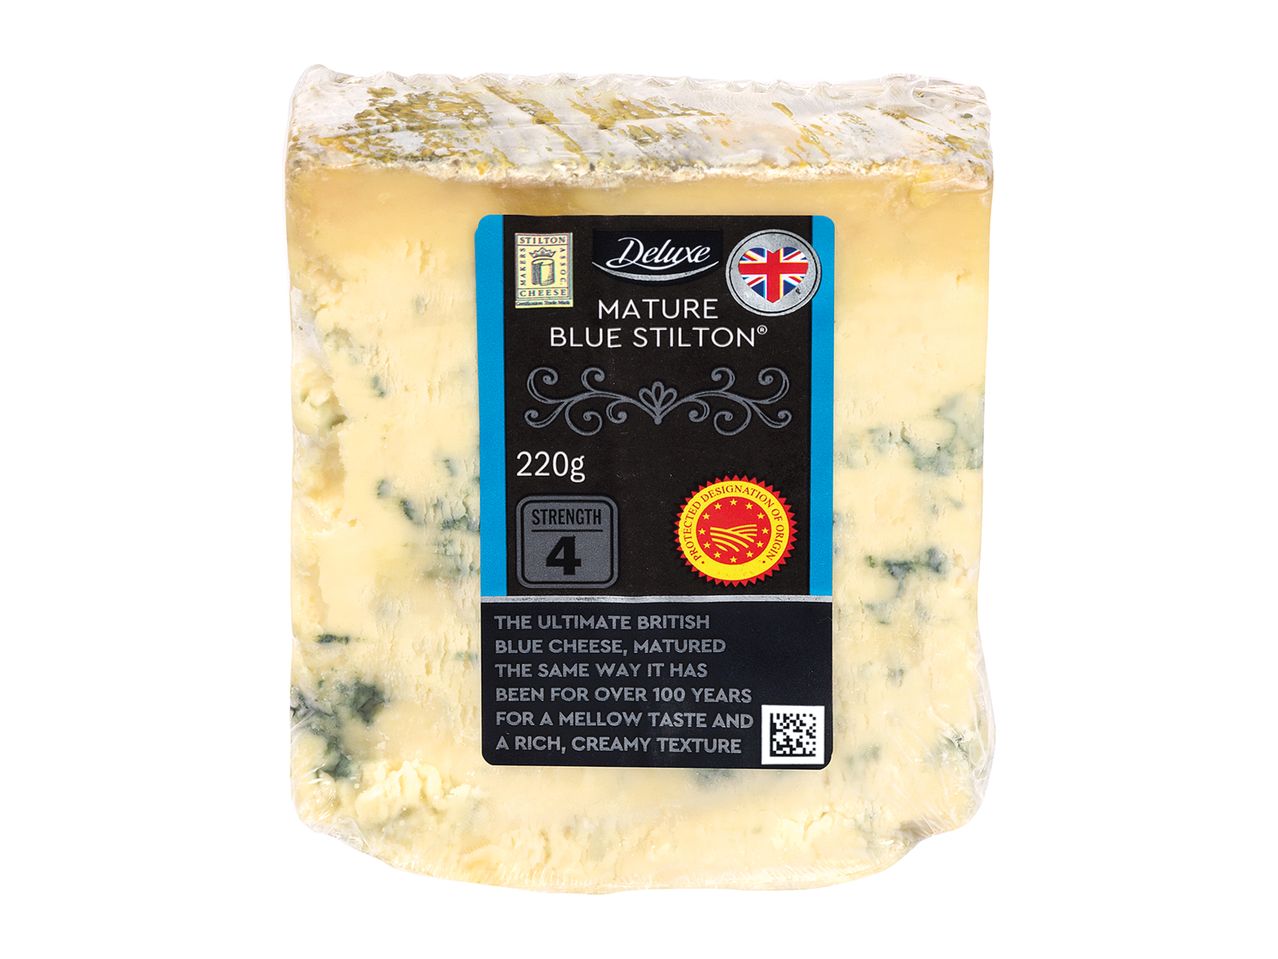 Go to full screen view: Deluxe Mature Blue Stilton - Image 1